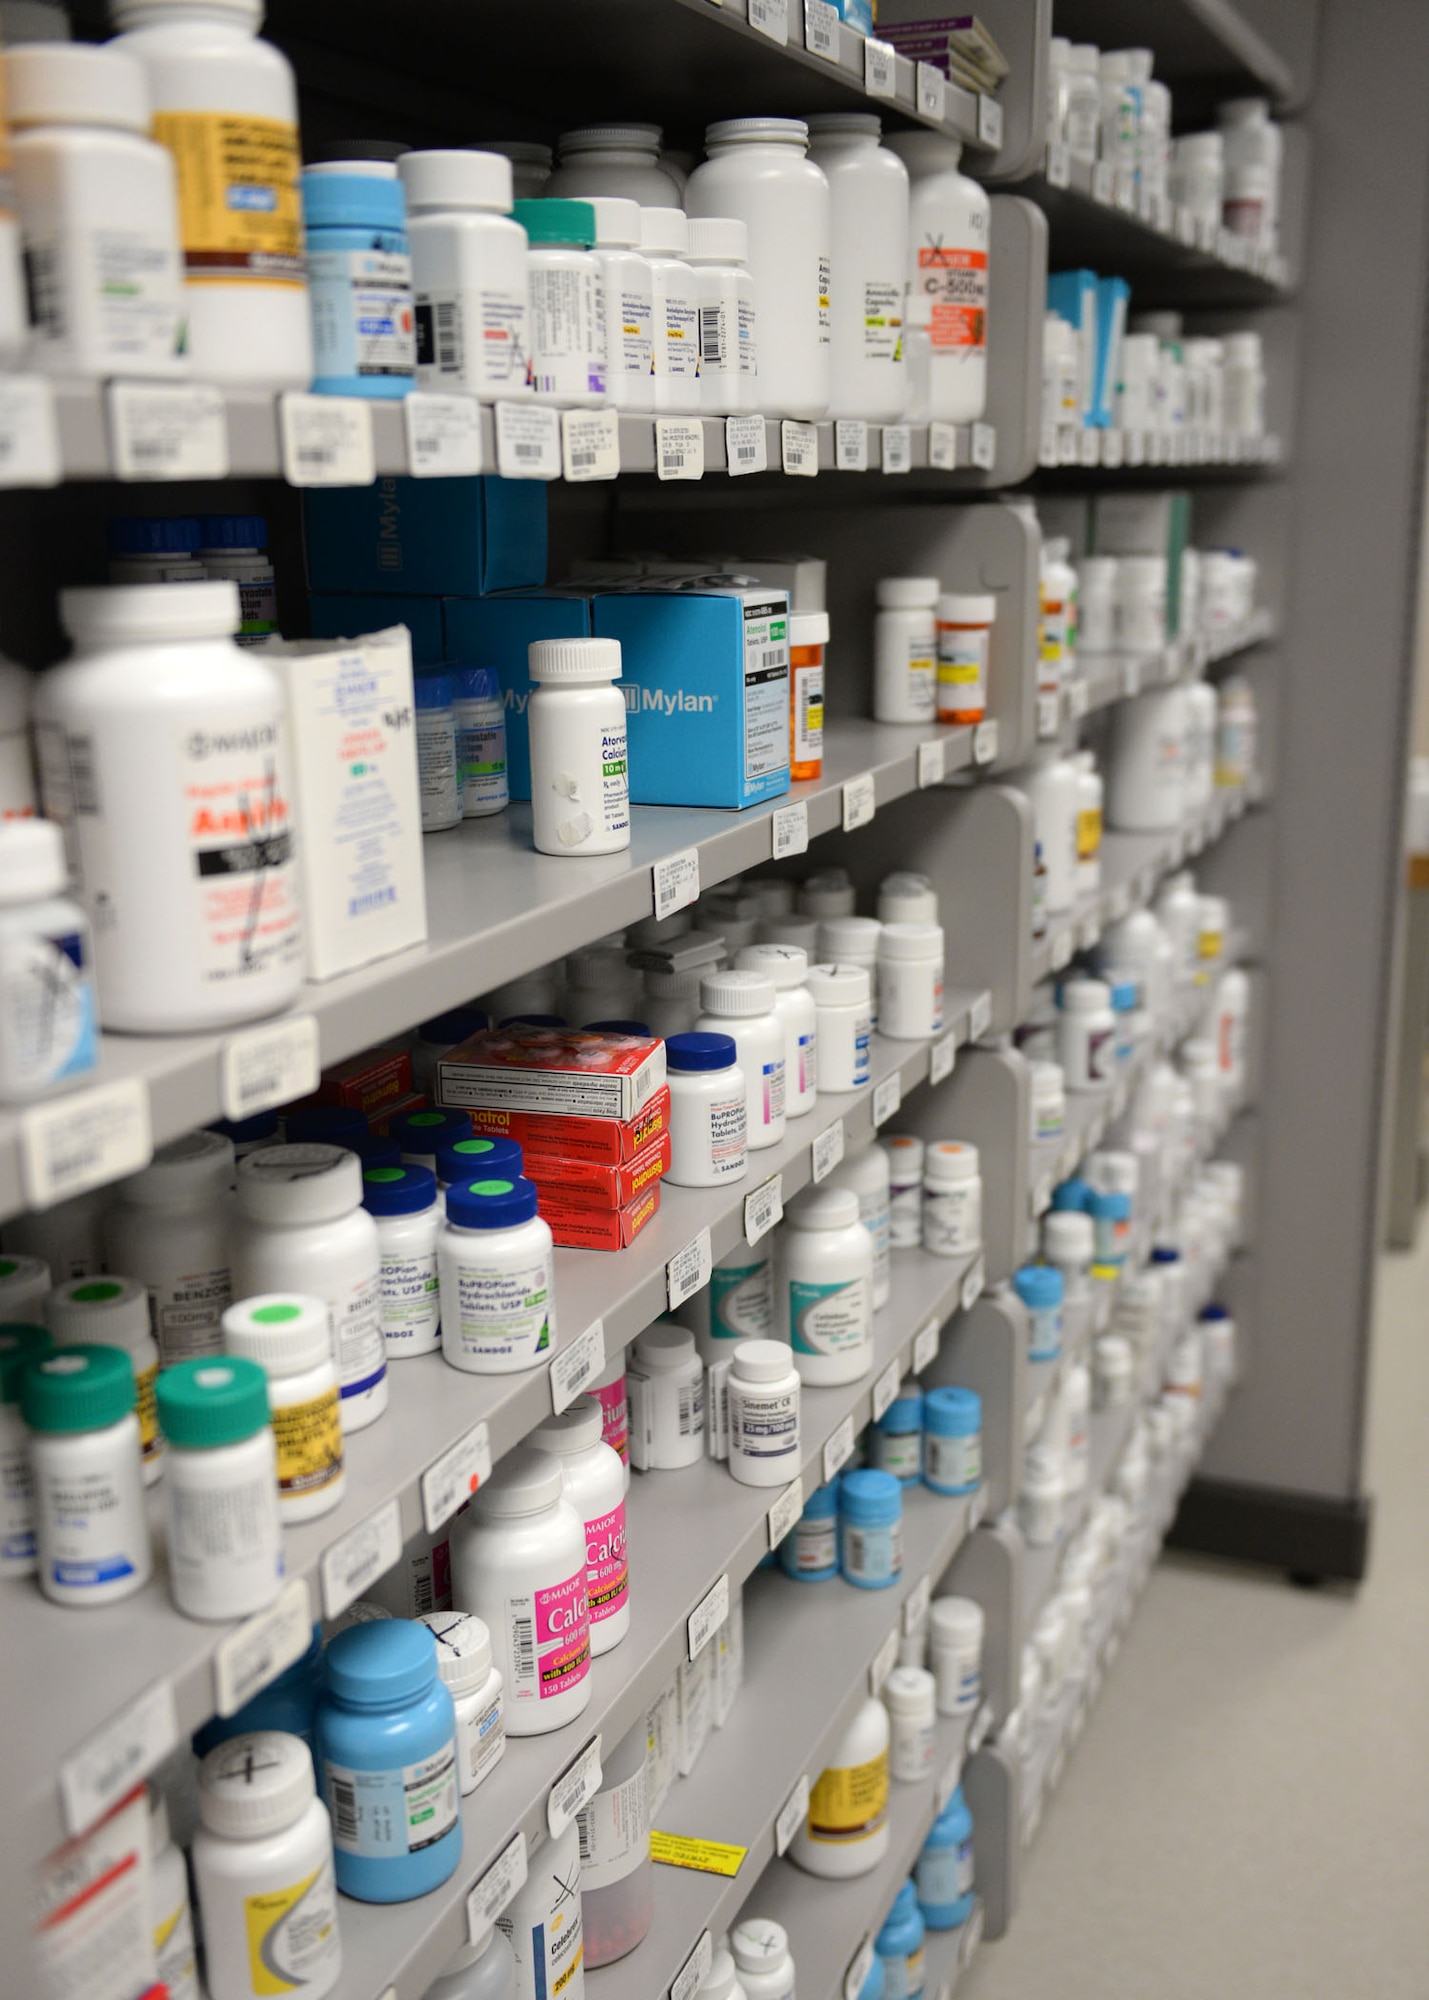 The 36th Medical Support Squadron pharmacy holds more than 500 medications in its supply. On average, the pharmacy fills and dispenses 150 prescriptions a day. (U.S. Air Force photo by Airman 1st Class Joshua Smoot/Released)